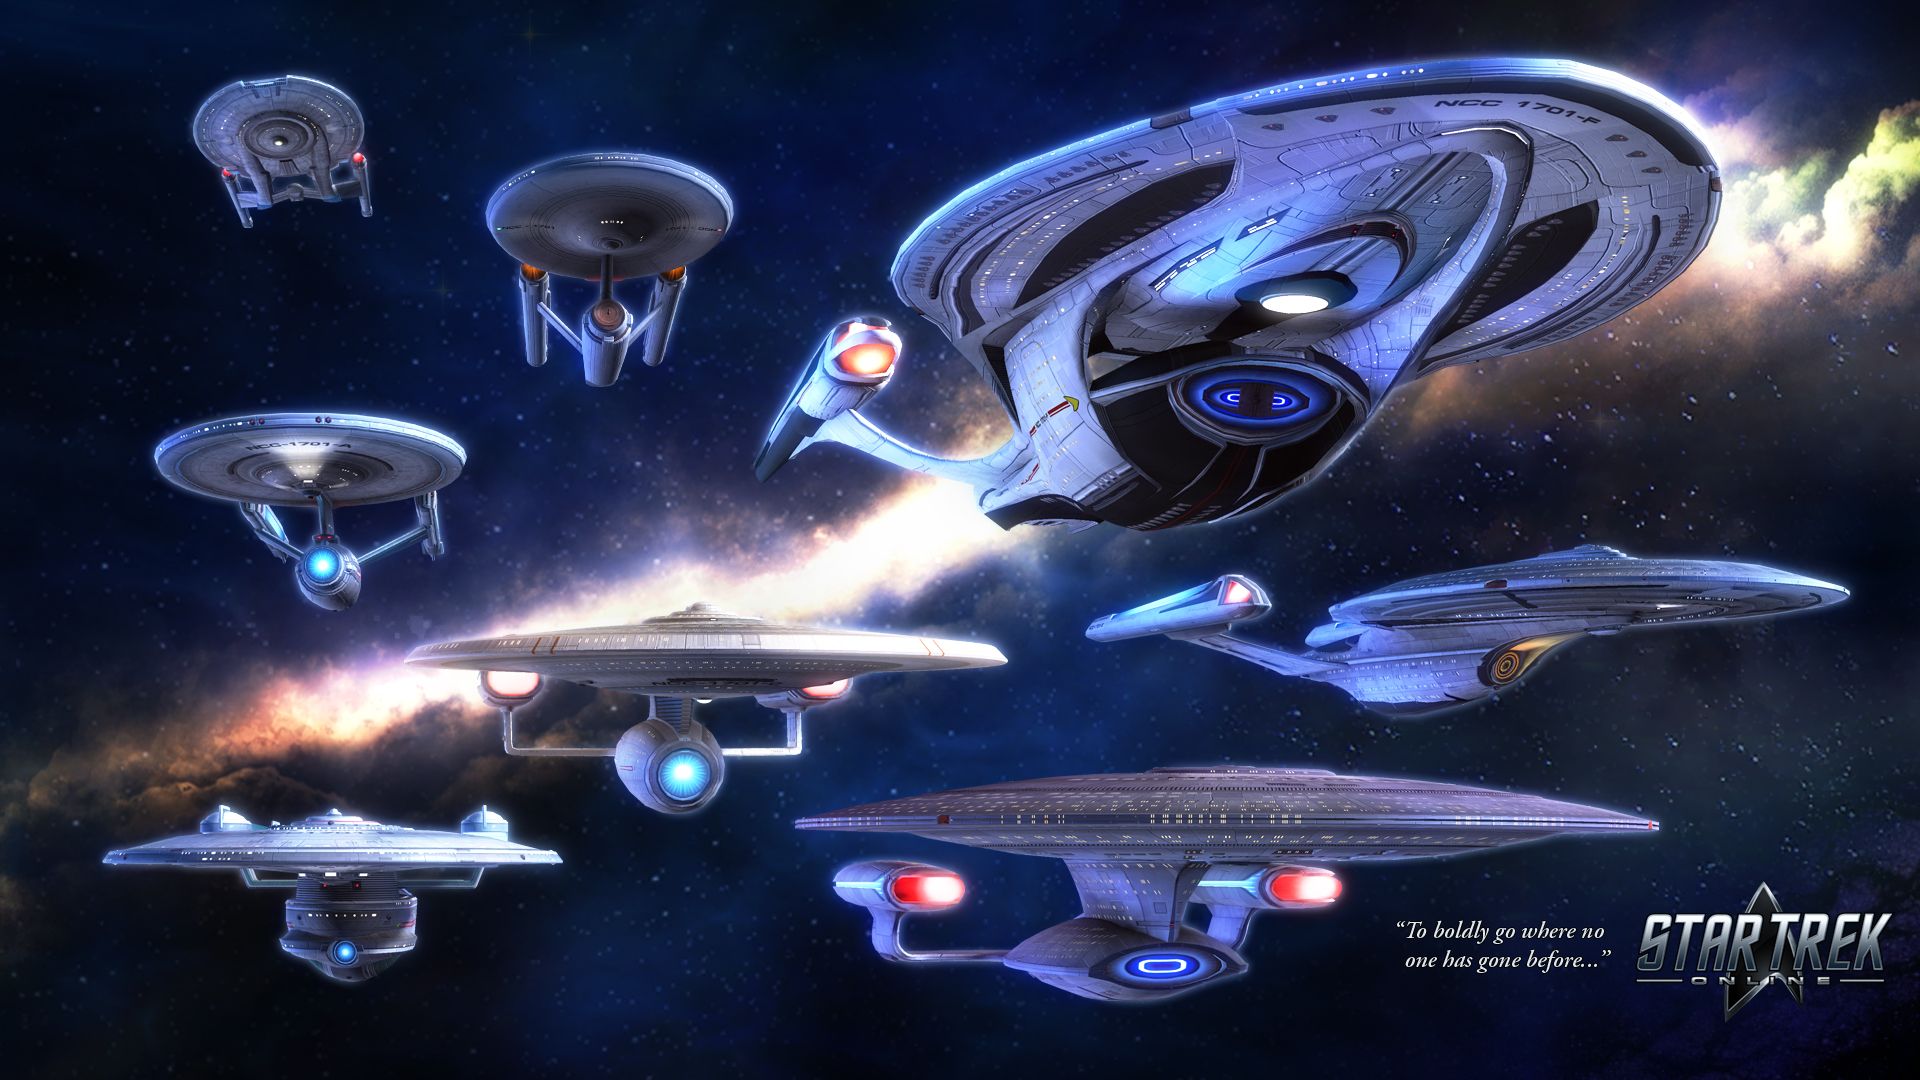 Share can I get a federation ships through time photo? : startrek